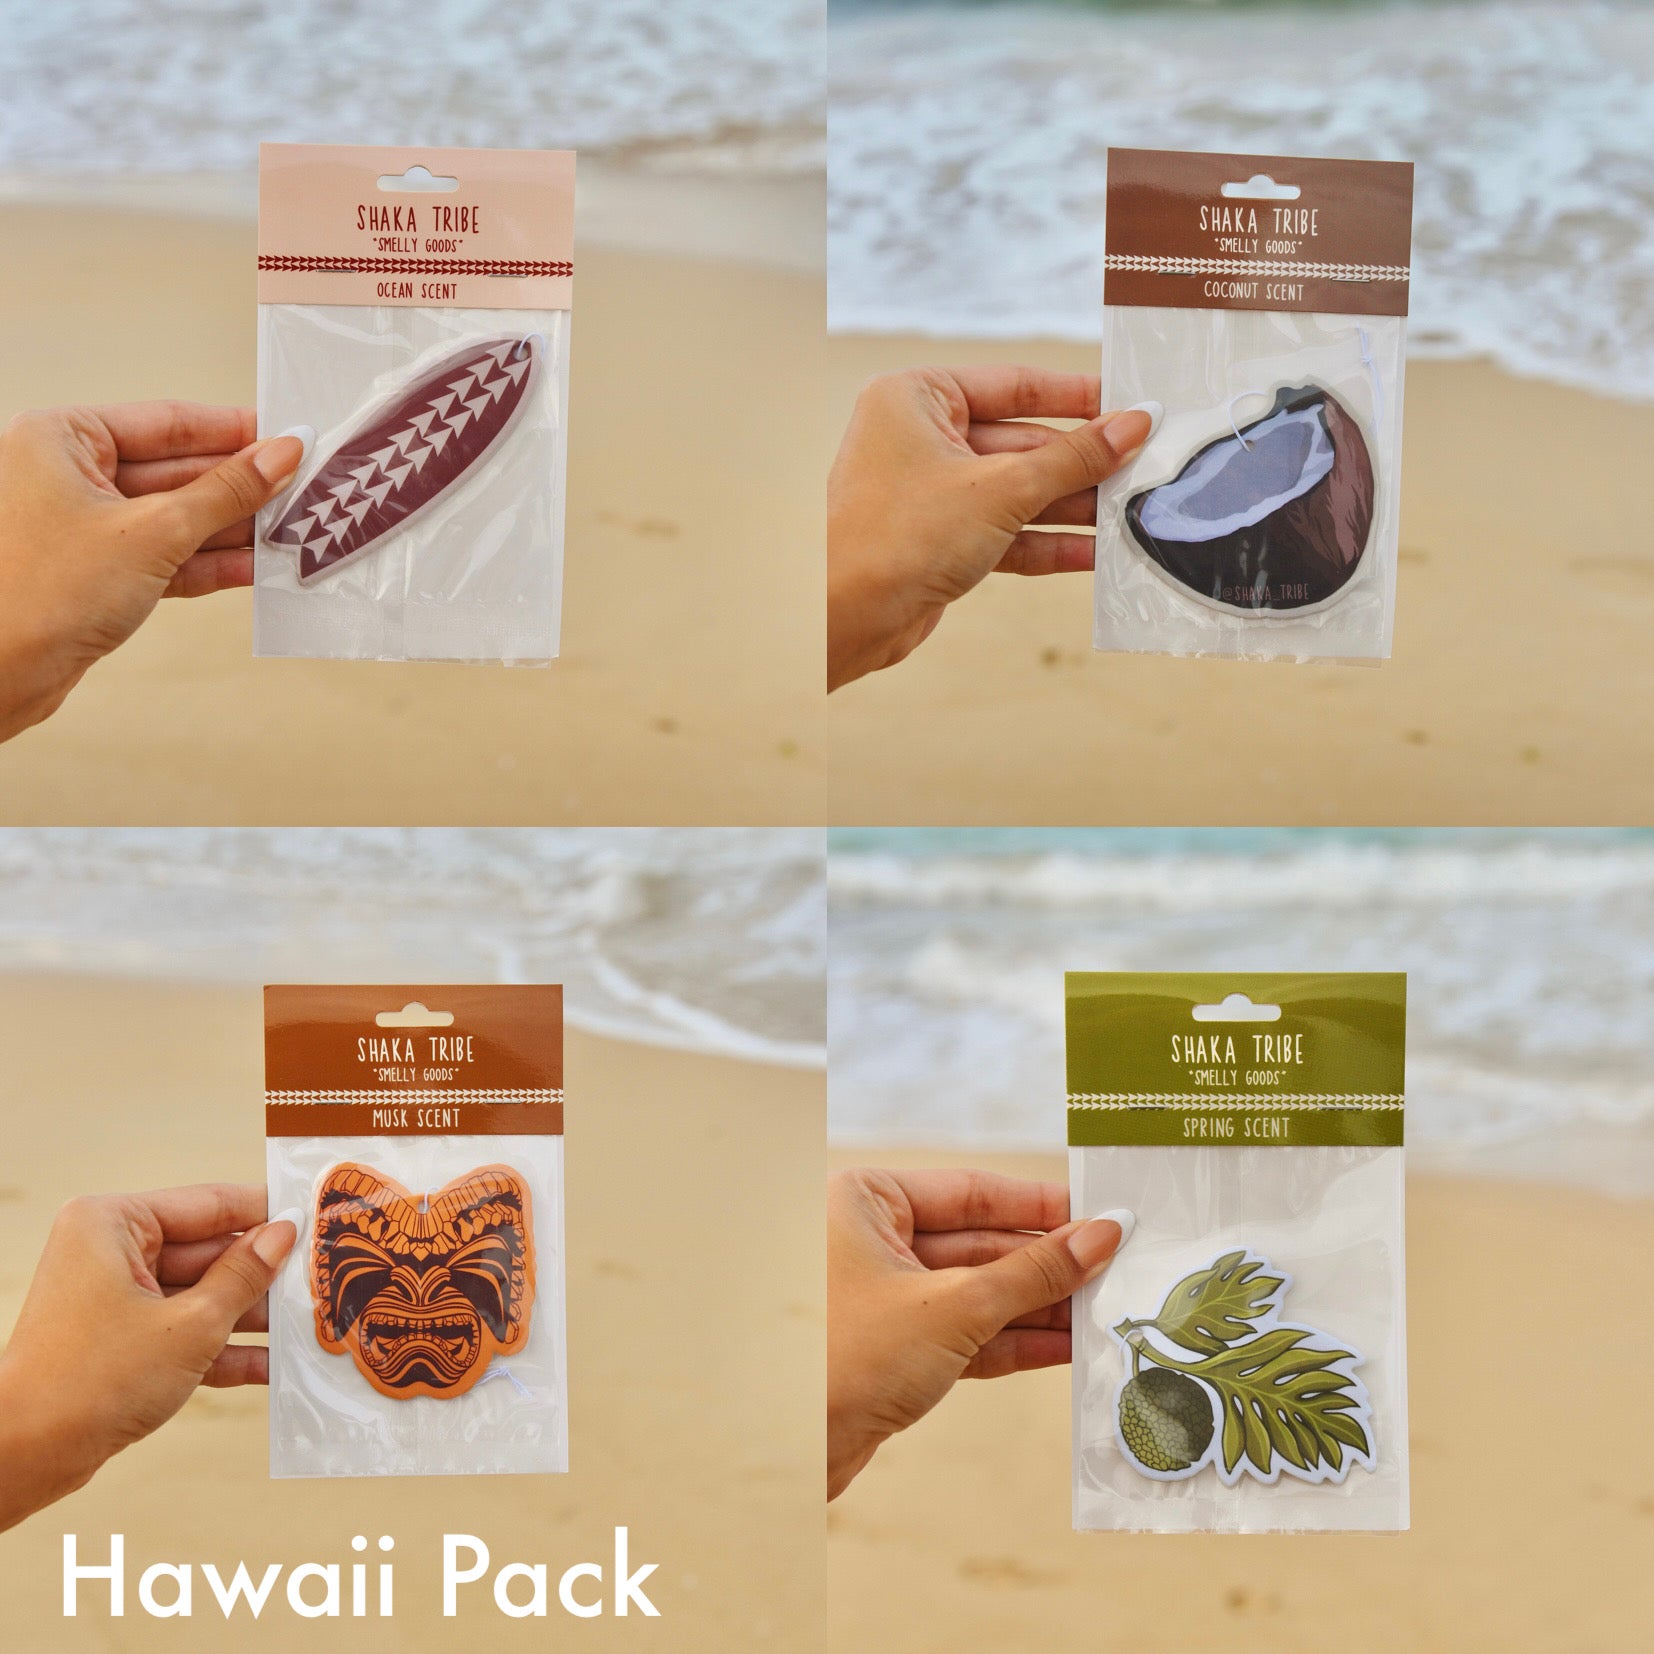 Hawaii Pack | "Smelly Goods" | Car Fresheners